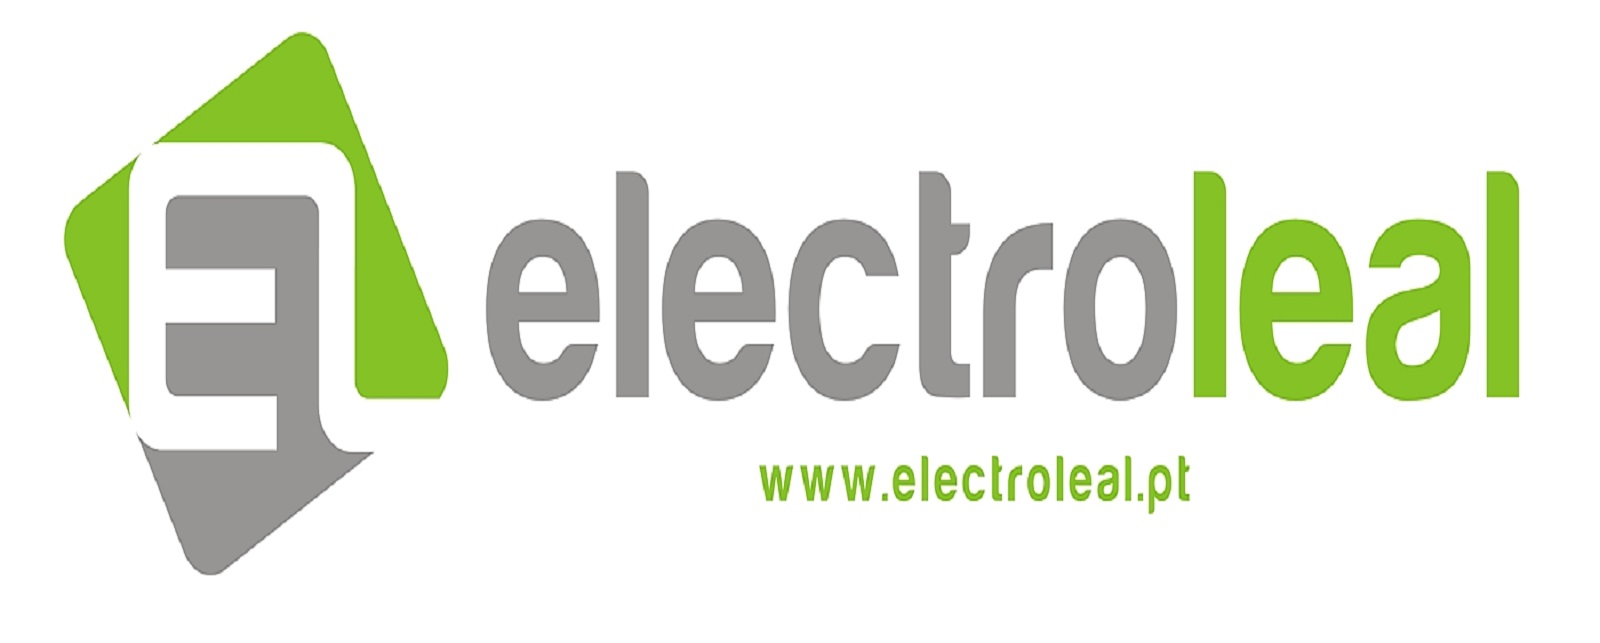 Electroleal